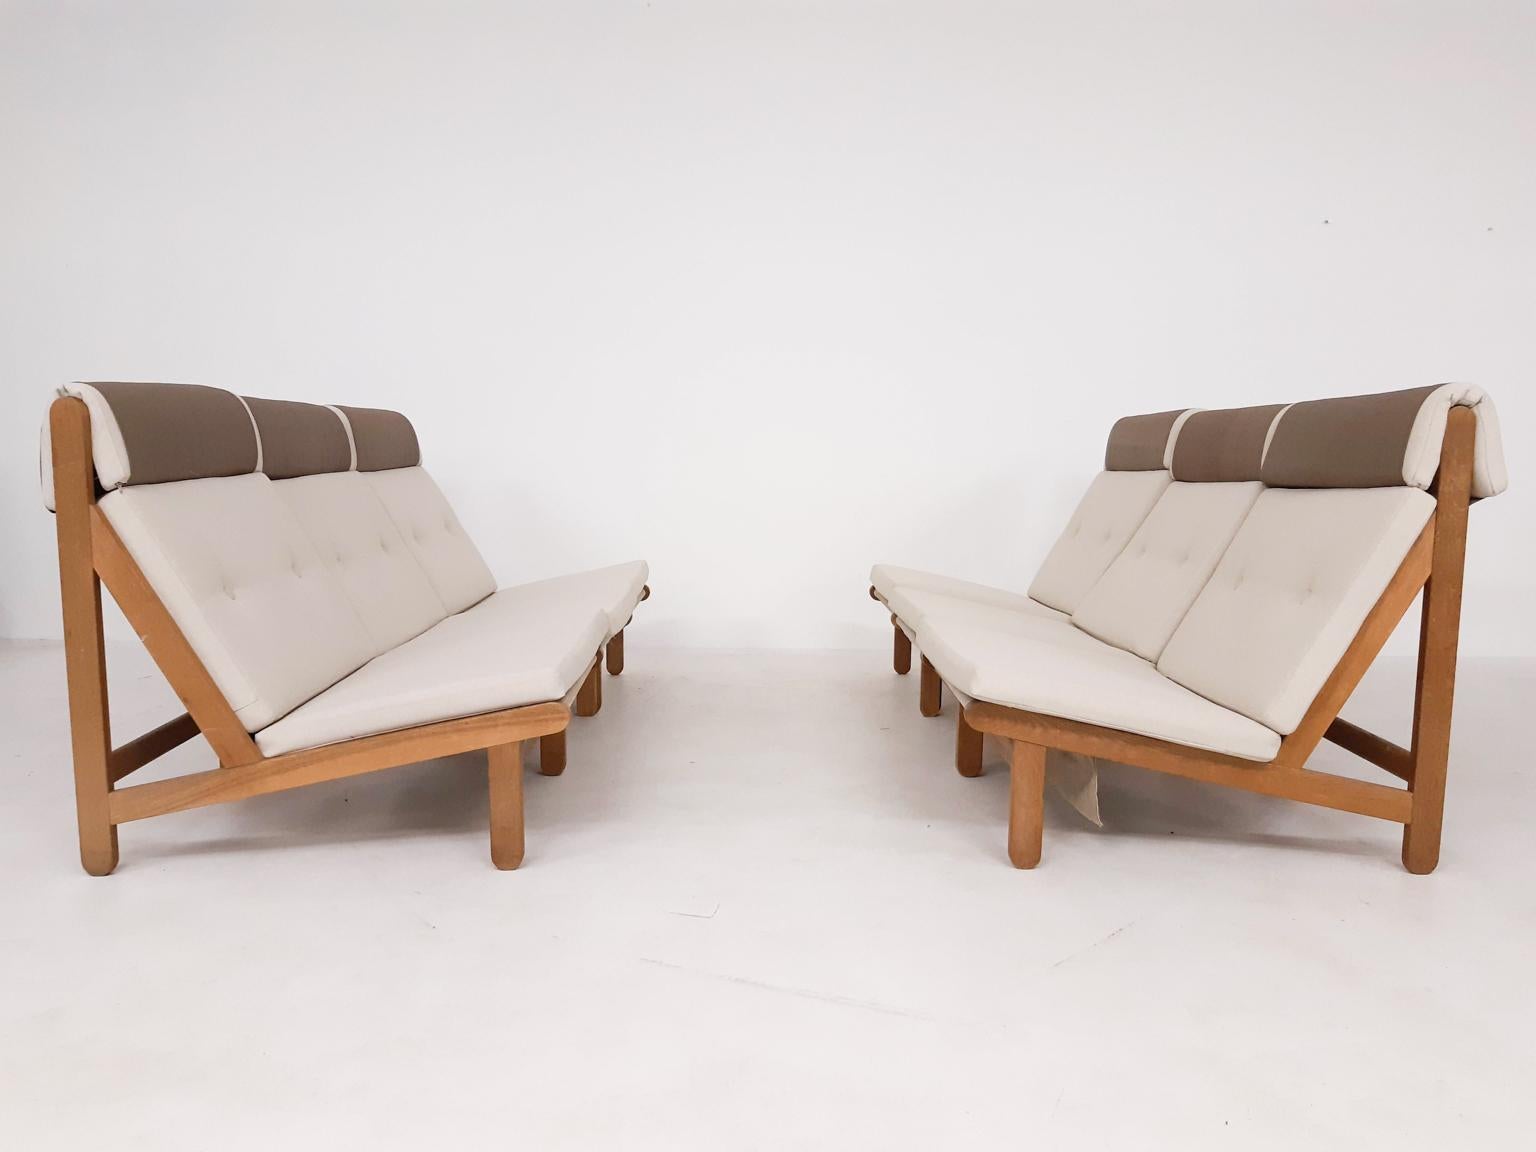 Large set of oak lounge chairs and one ottoman by Bernt Petersen for Schiang Furniture. Made and designed in Denmark in 1965.

Not often we find a set of midcentury Danish design lounge chairs in this quantity. The 